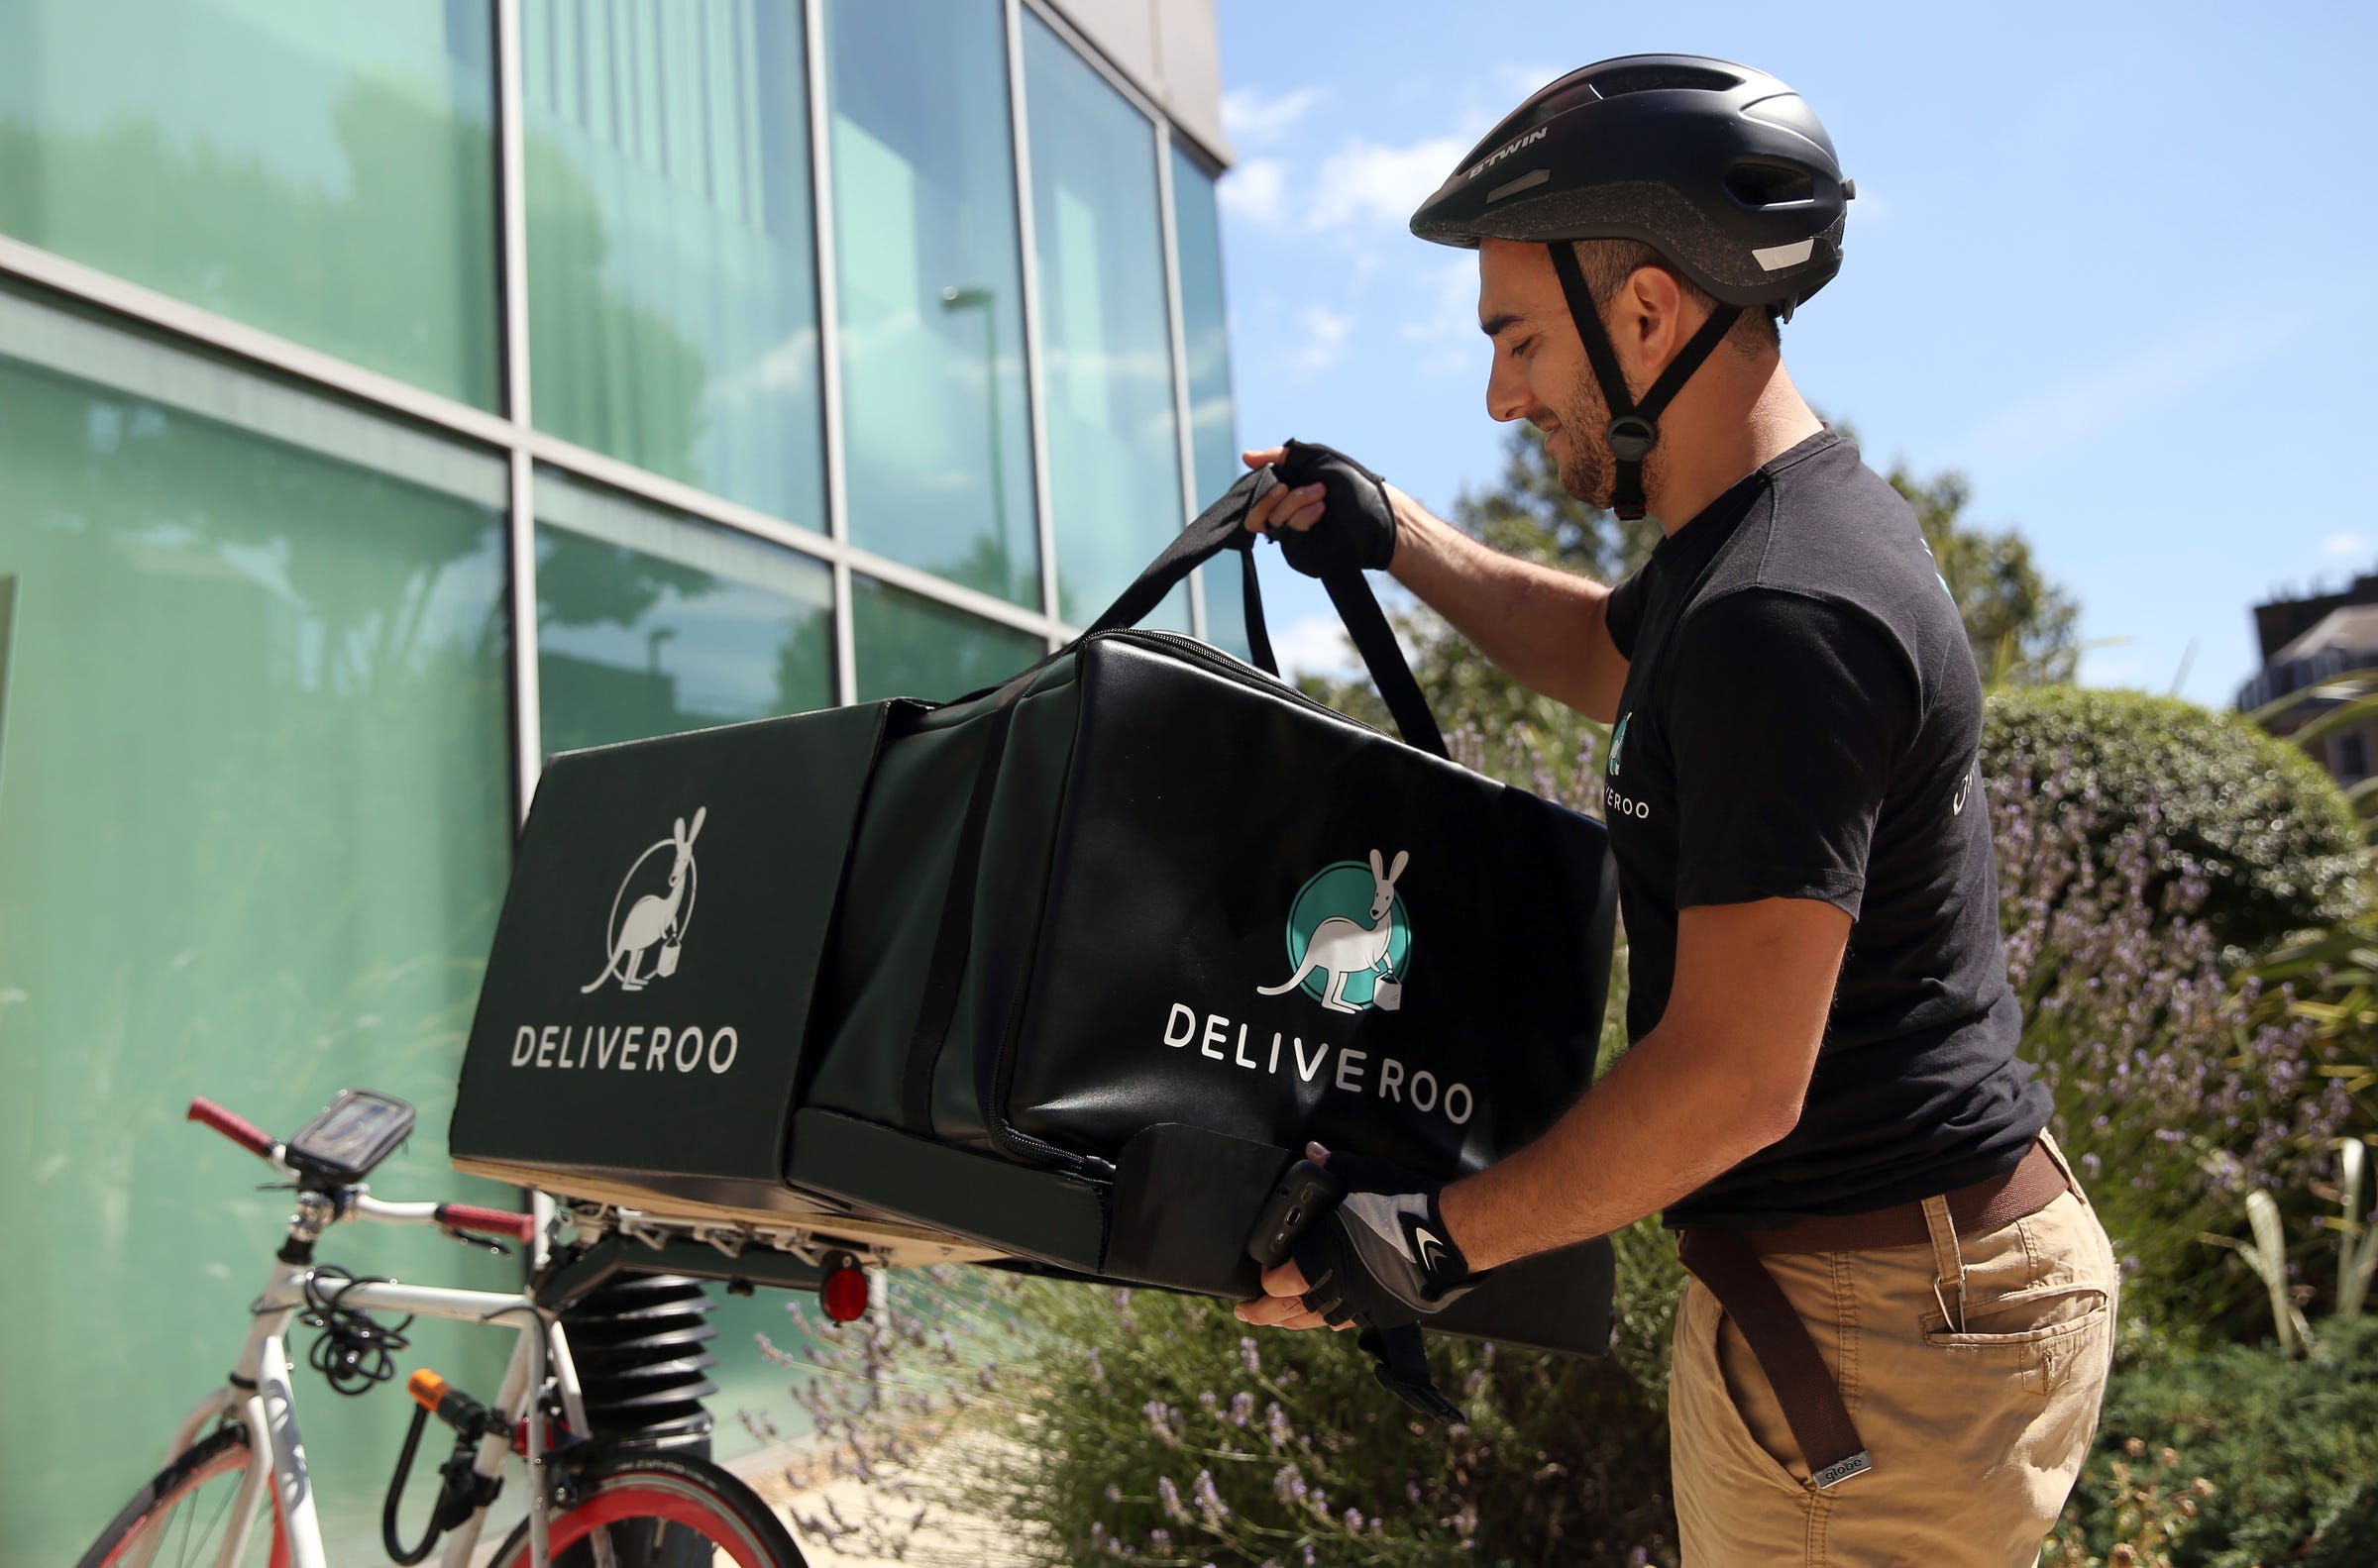 deliveroo delivery worker london bicycle